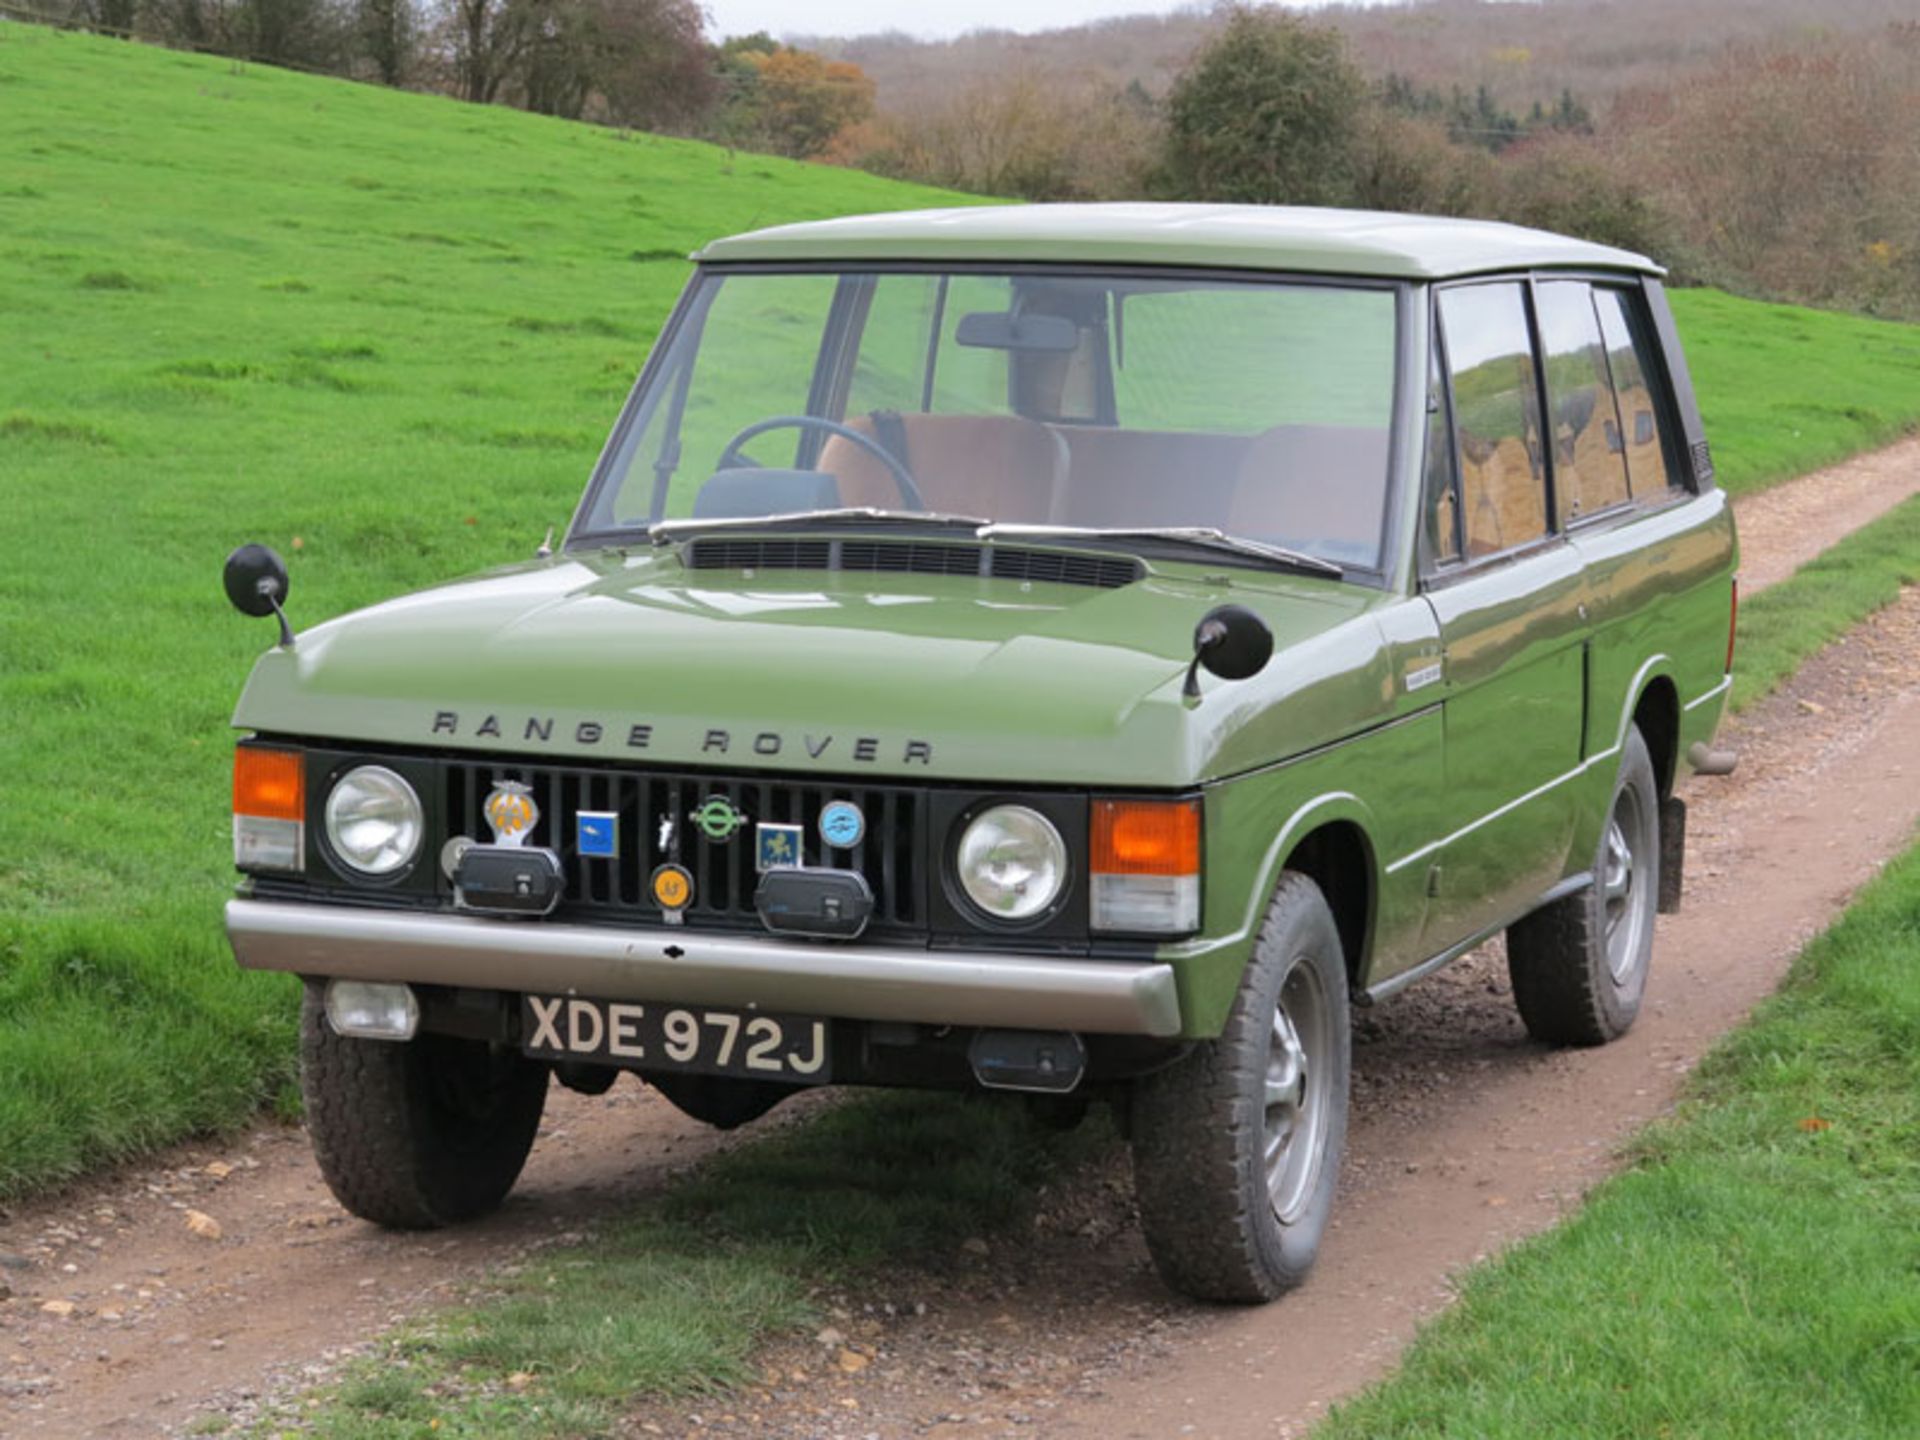 - Rare and desirable 'Suffix A' Range Rover

- 1 of 2,844 Home Market RHD cars built during the 1971